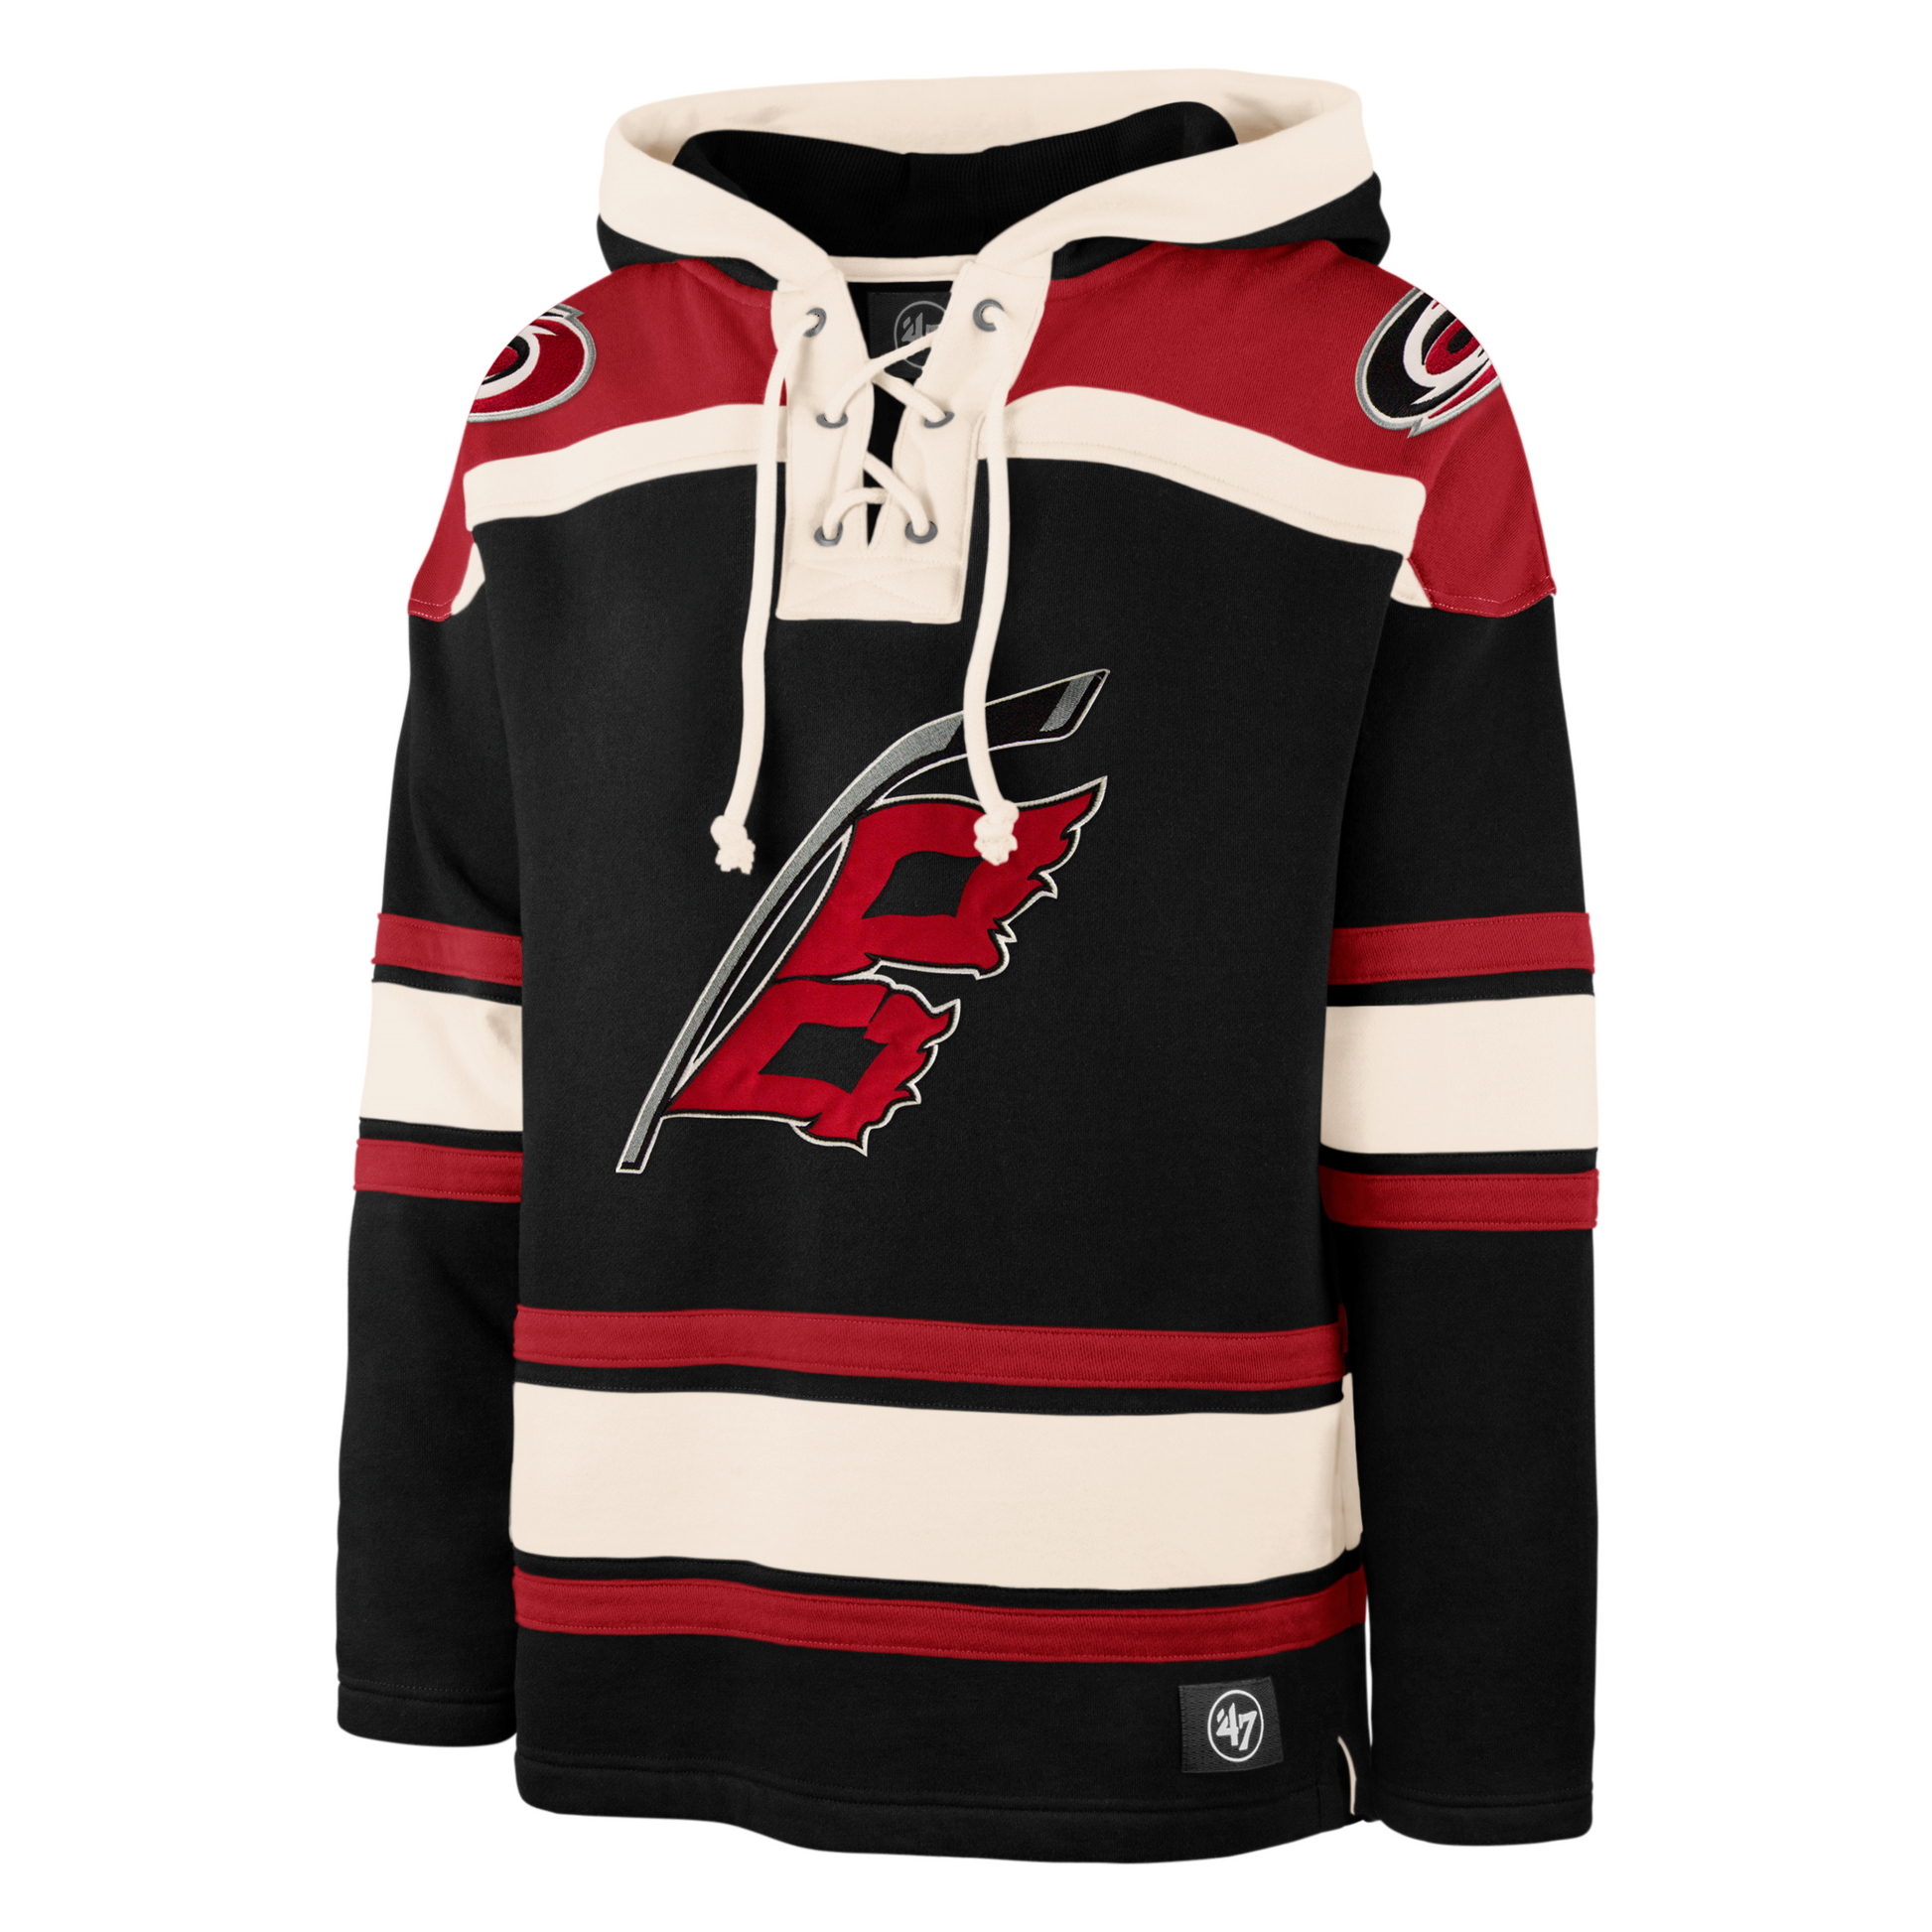 Front: Black red and white lacer hoodie with Flag logo on front, primary logo on shoulders